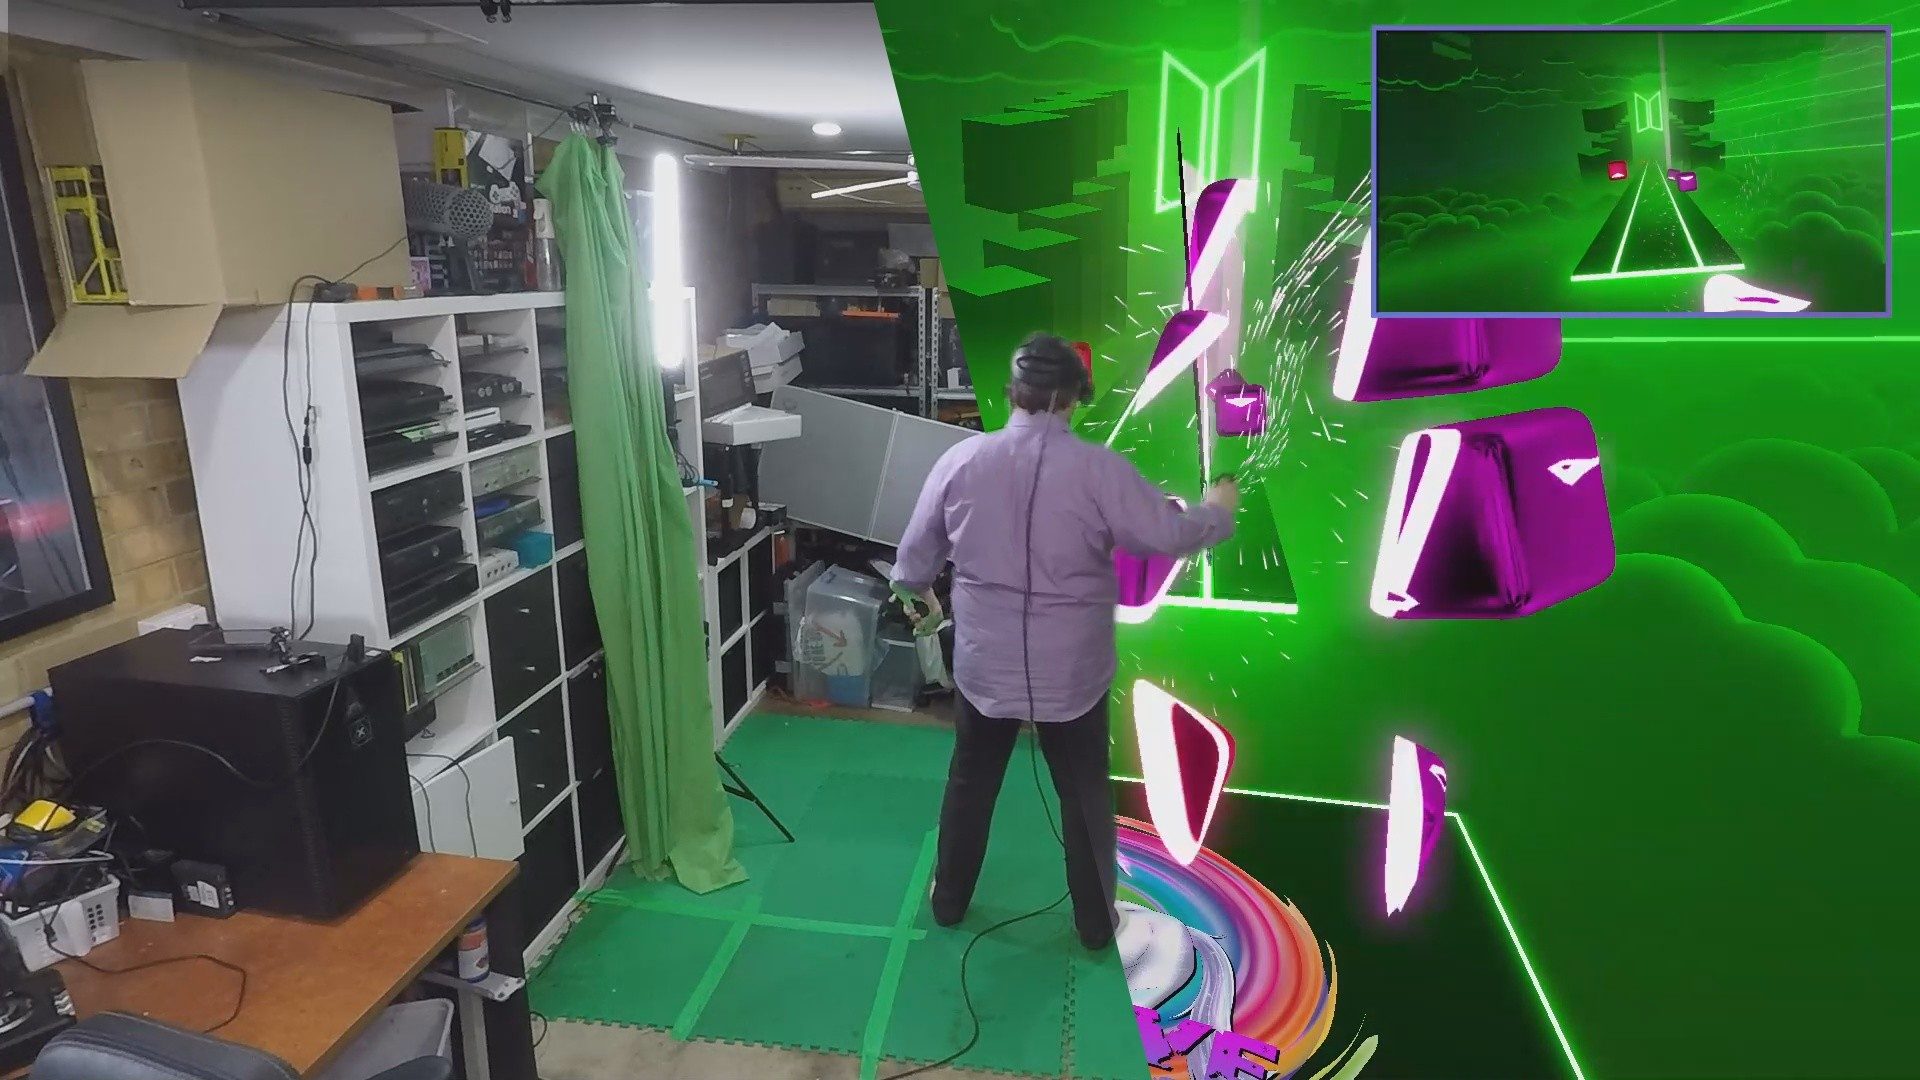 Meta Ditches Its Own Tools in Favor of LIV Partnership for Mixed Reality Capture on Quest